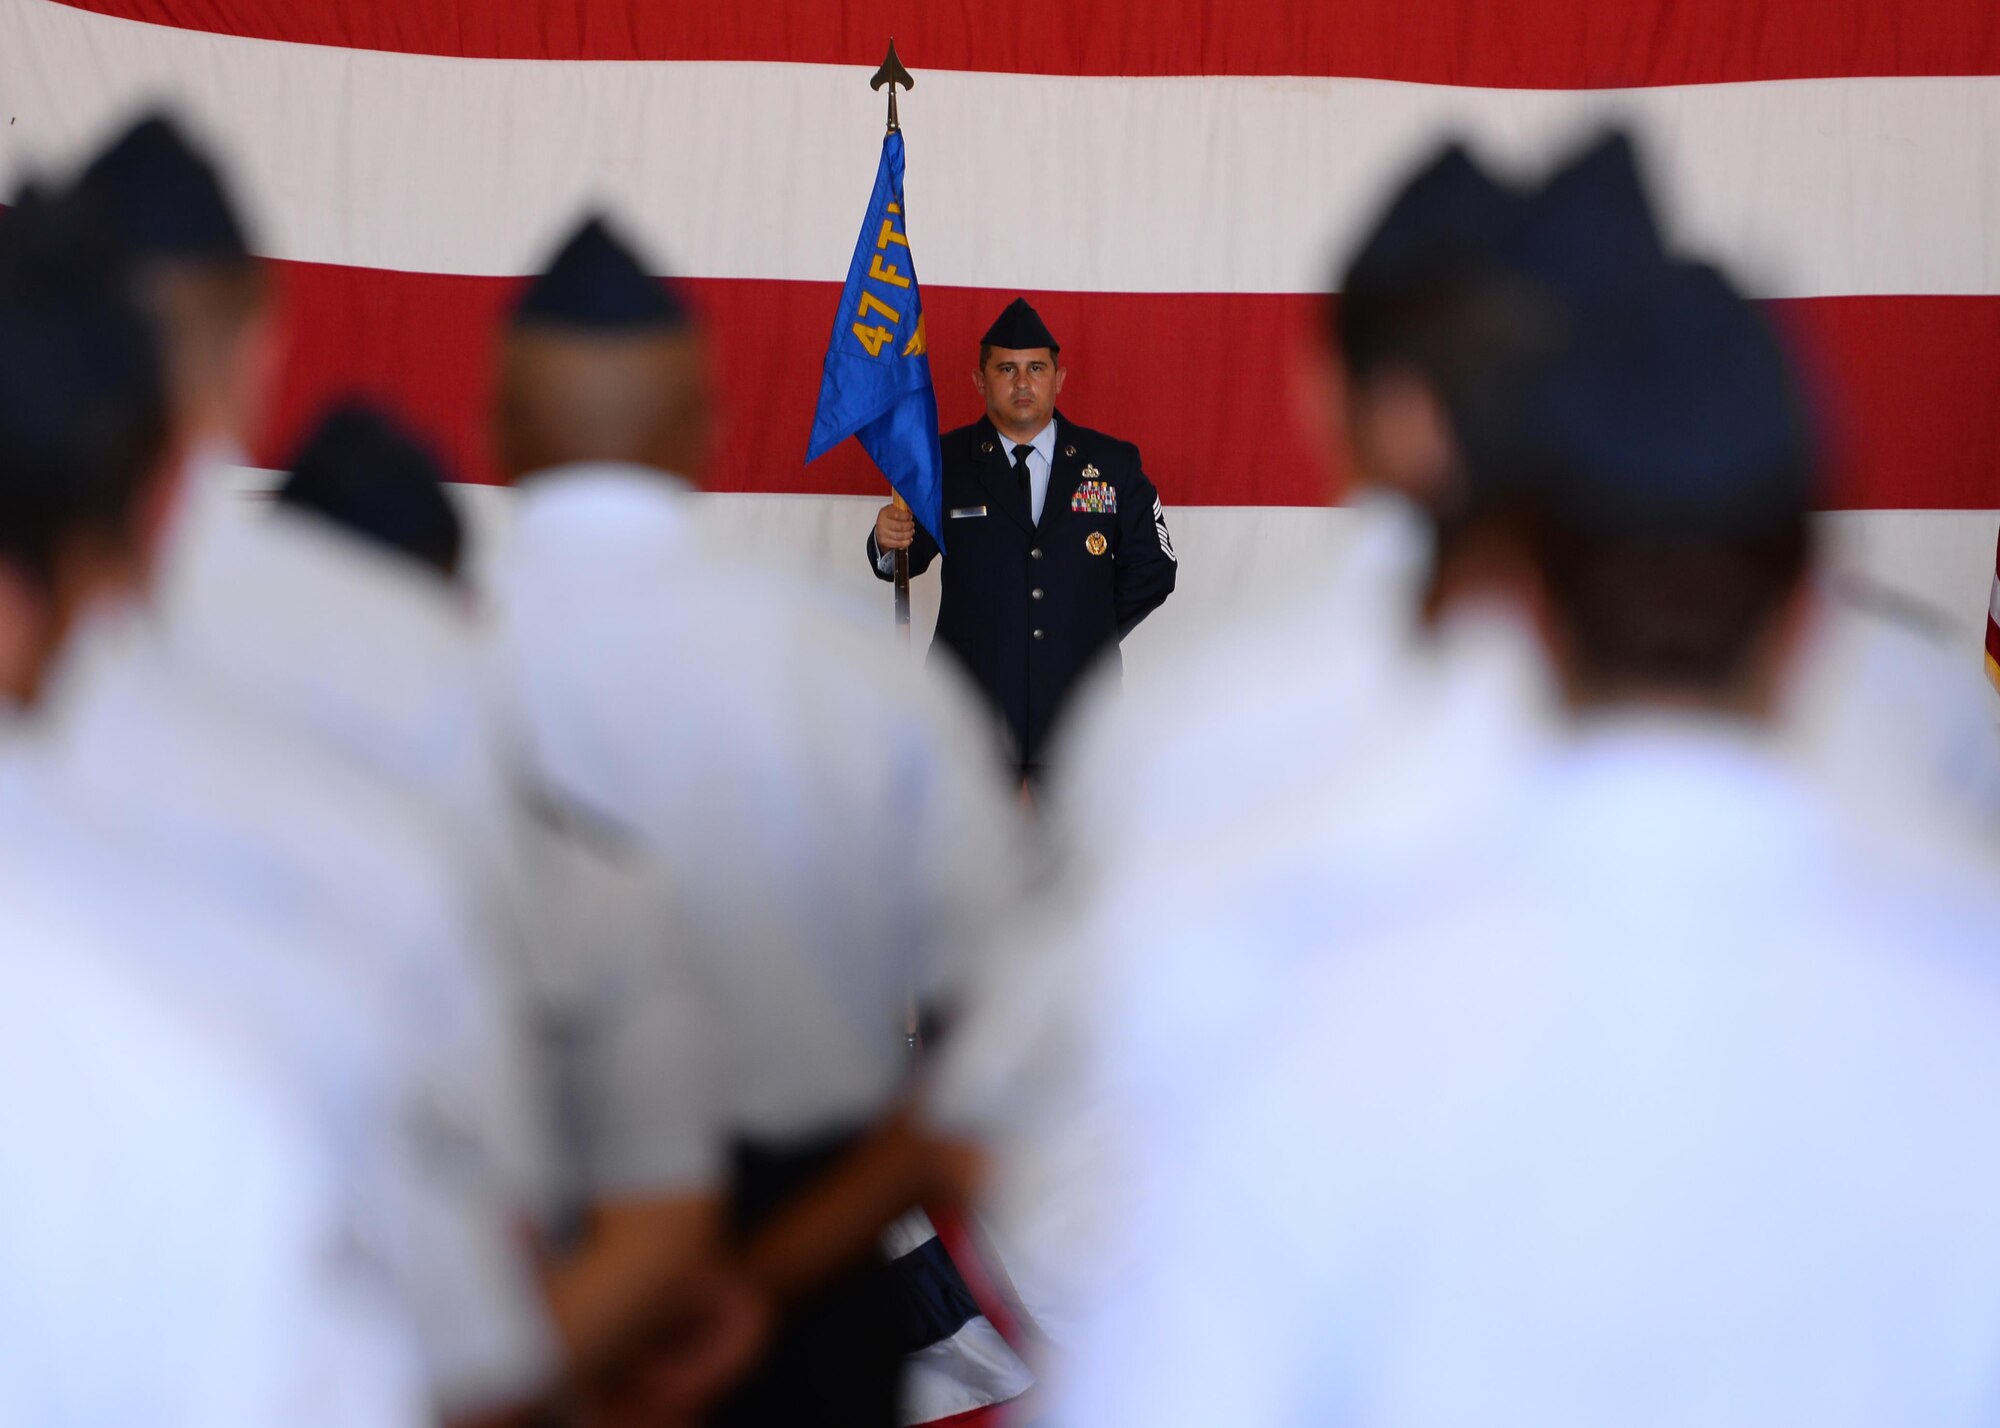 U.S. Air Force Chief Master Sgt. George Richey, 47th Flying Training Wing command chief, stands at ease with the wing’s guideon during the 47th Flying Training Wing’s change of command ceremony at Laughlin Air Force Base, Tx., June 28, 2017.  Chief Richey has served at the operational and strategic leadership levels with positions at the flight, squadron, and Headquarters Air Force levels. 